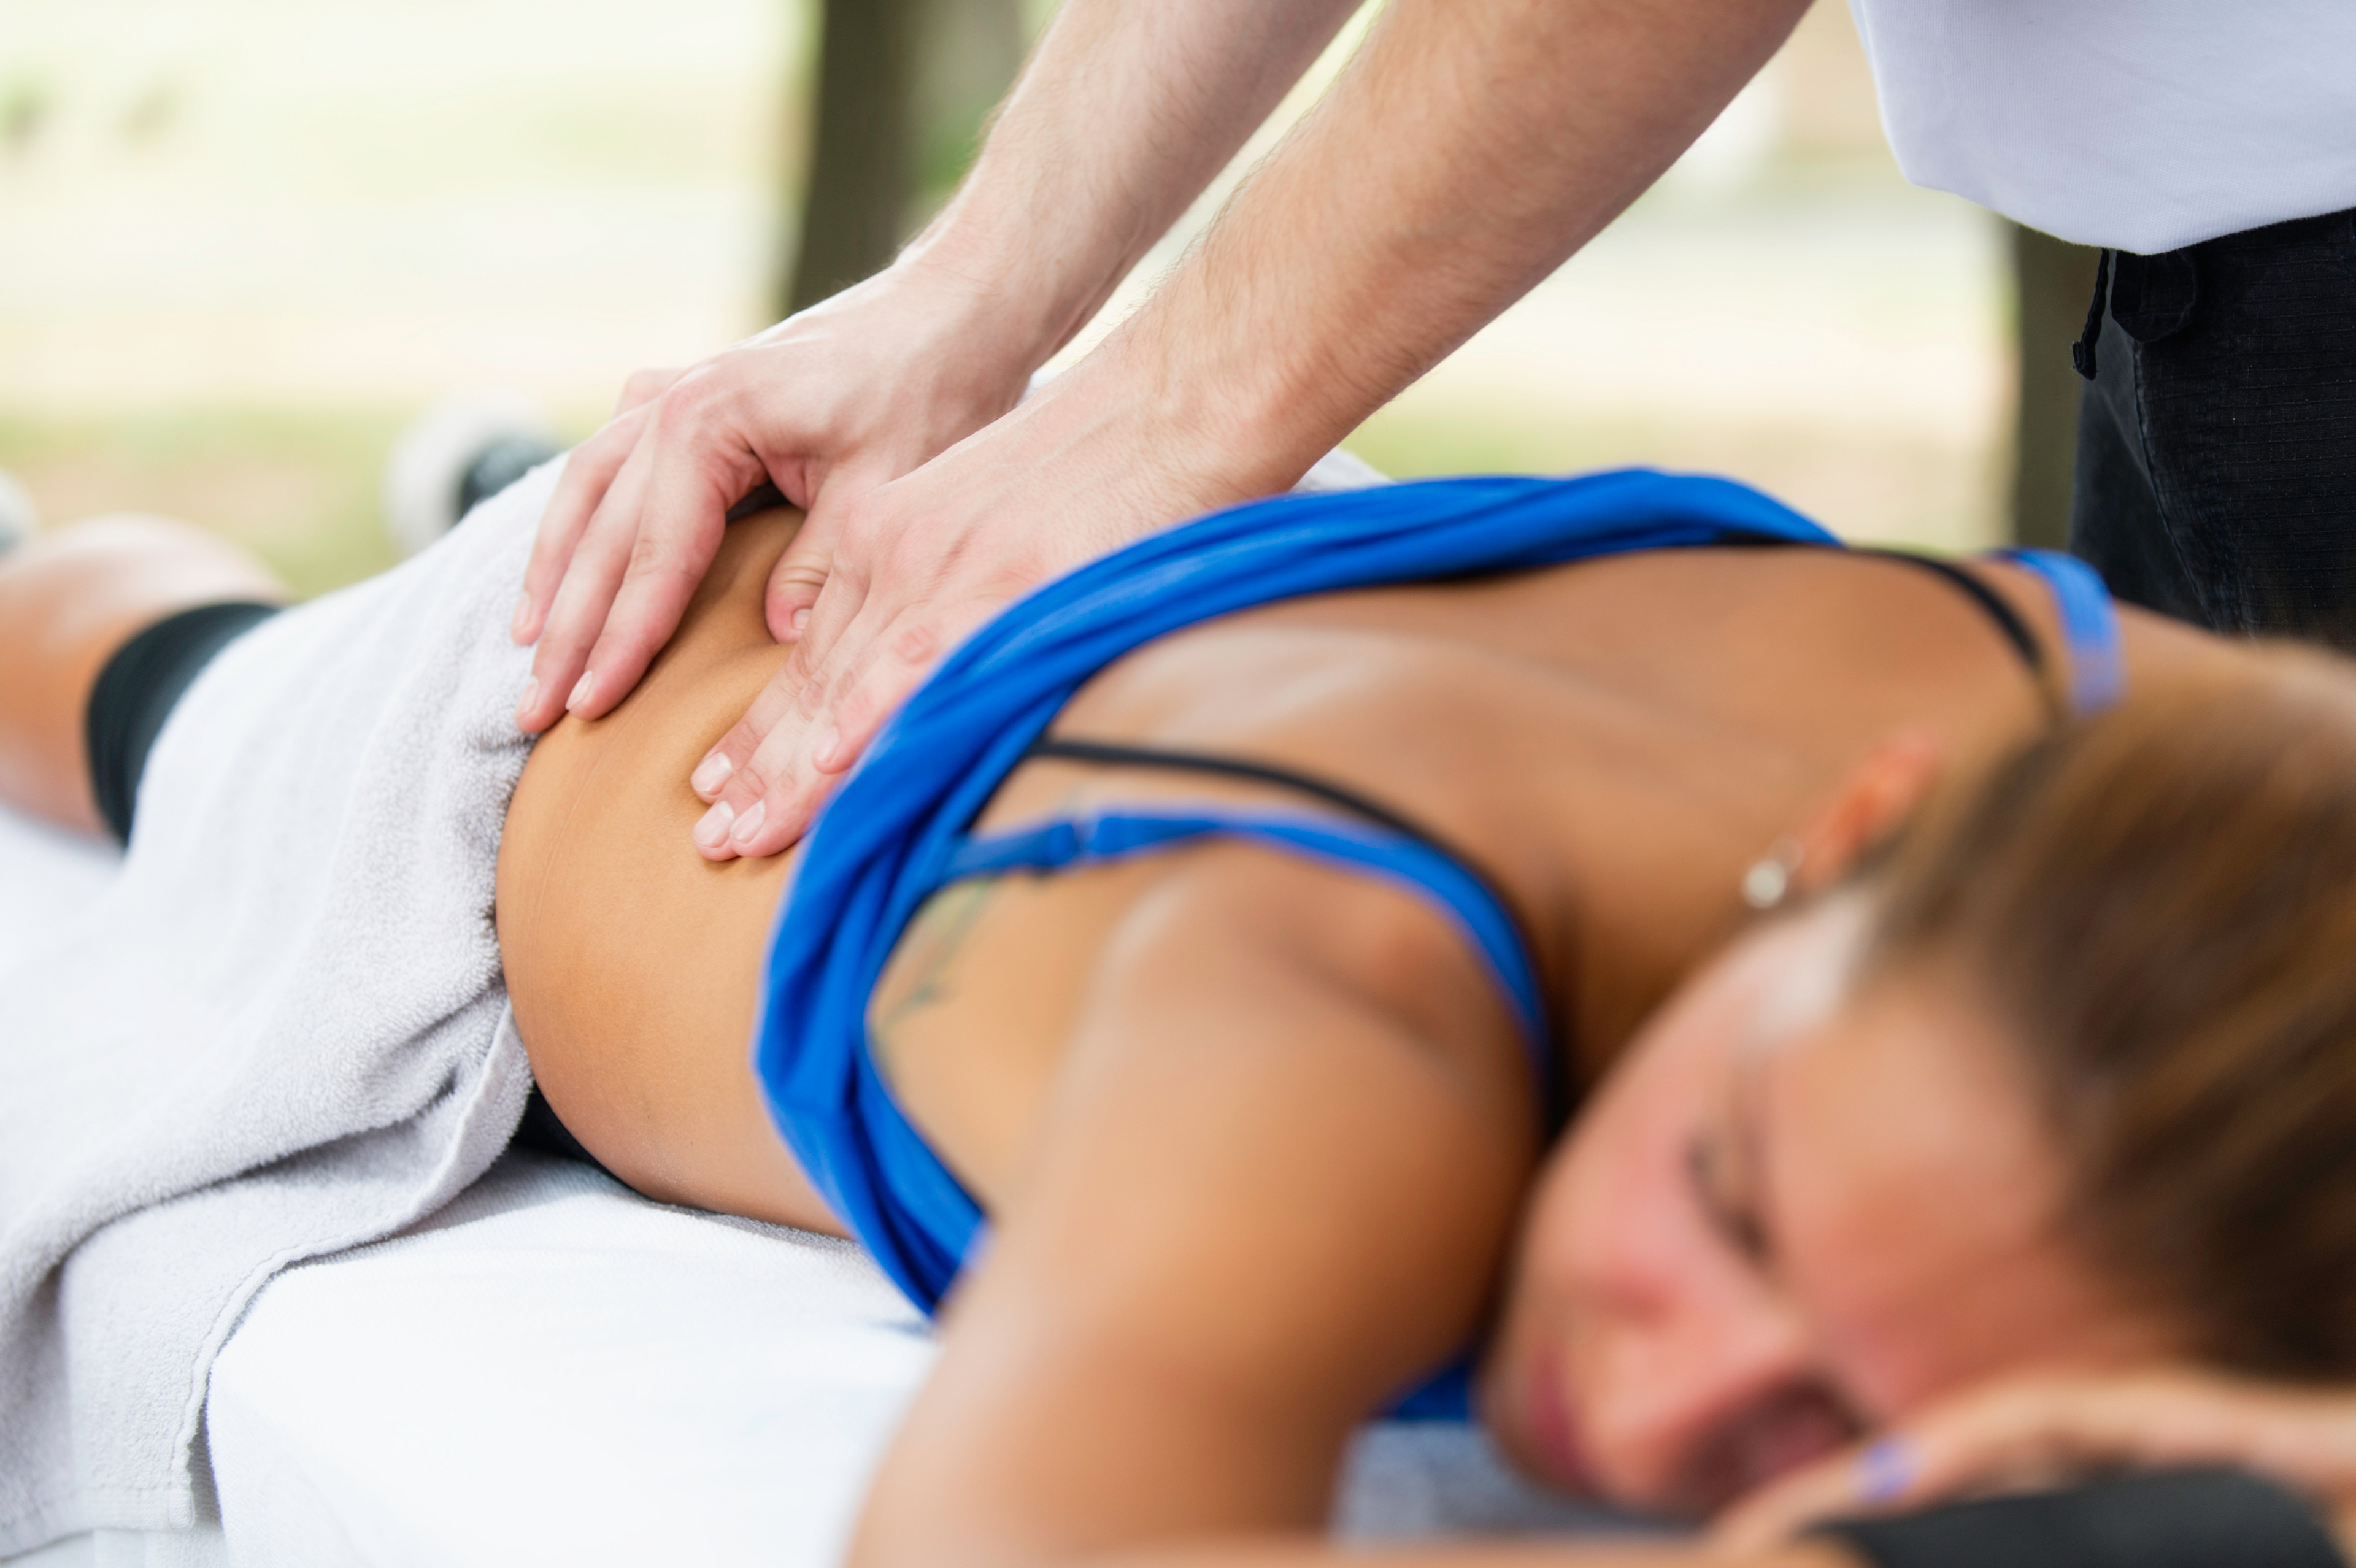 Massage can provide short-term pain relief. But to get rid of your back pain permanently, you must address the cause.